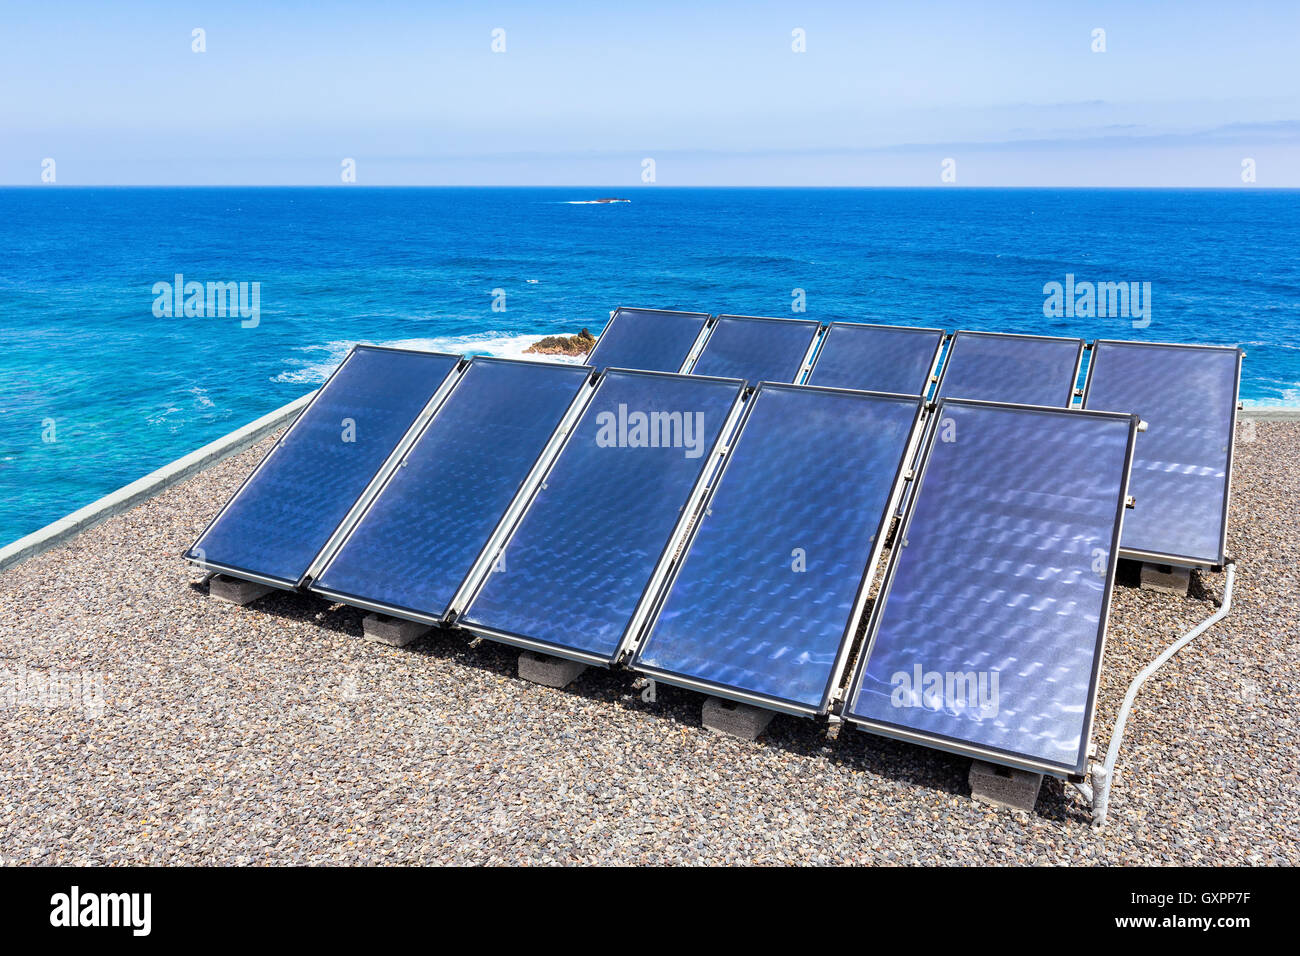 Group of blue solar panels on roof near water of ocean Stock Photo